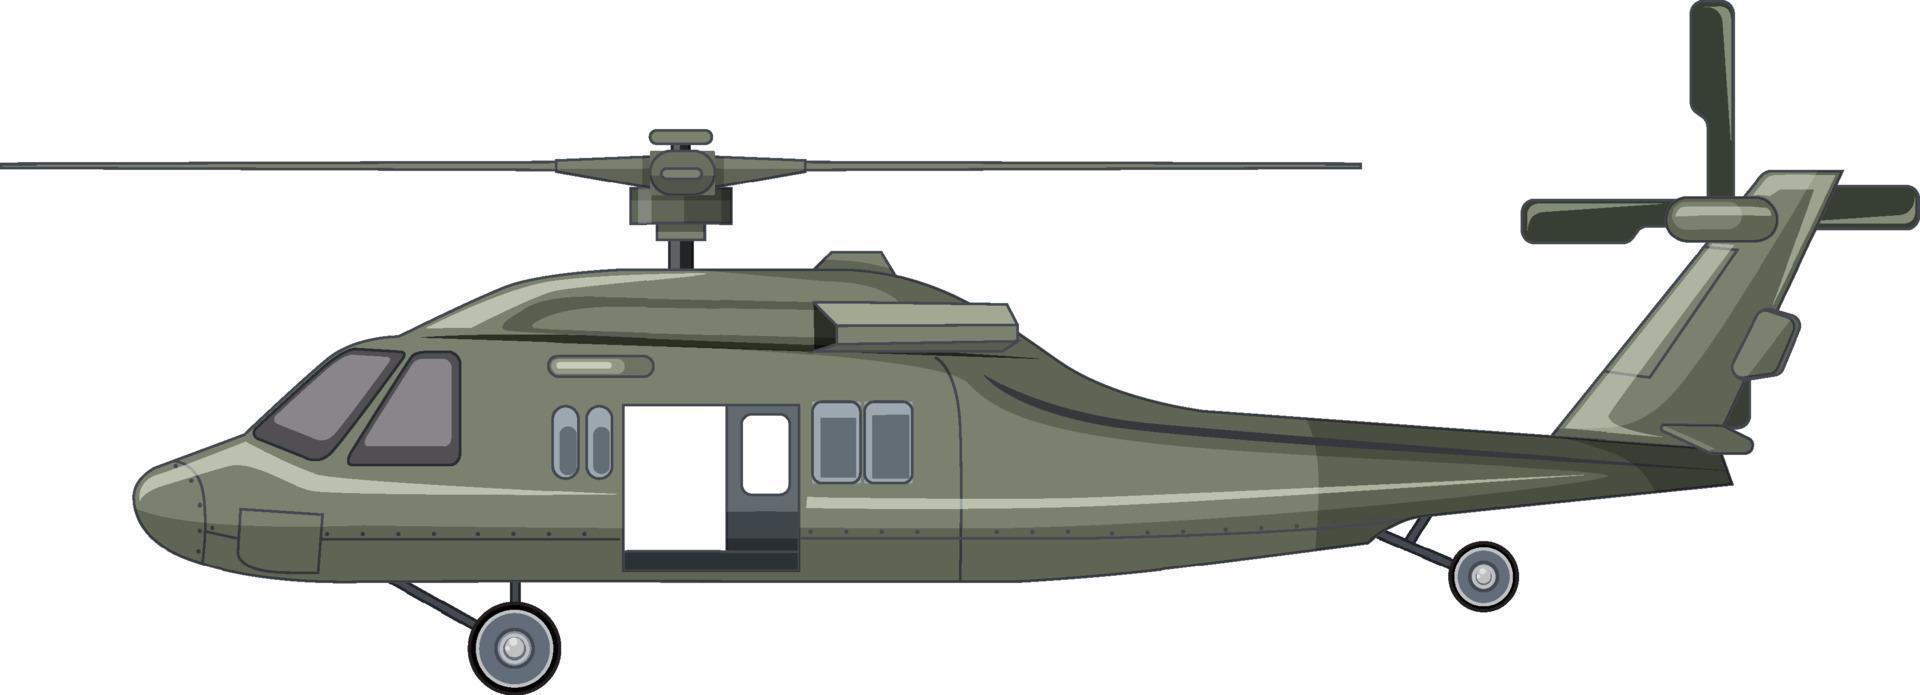 A military helicopter on white background vector